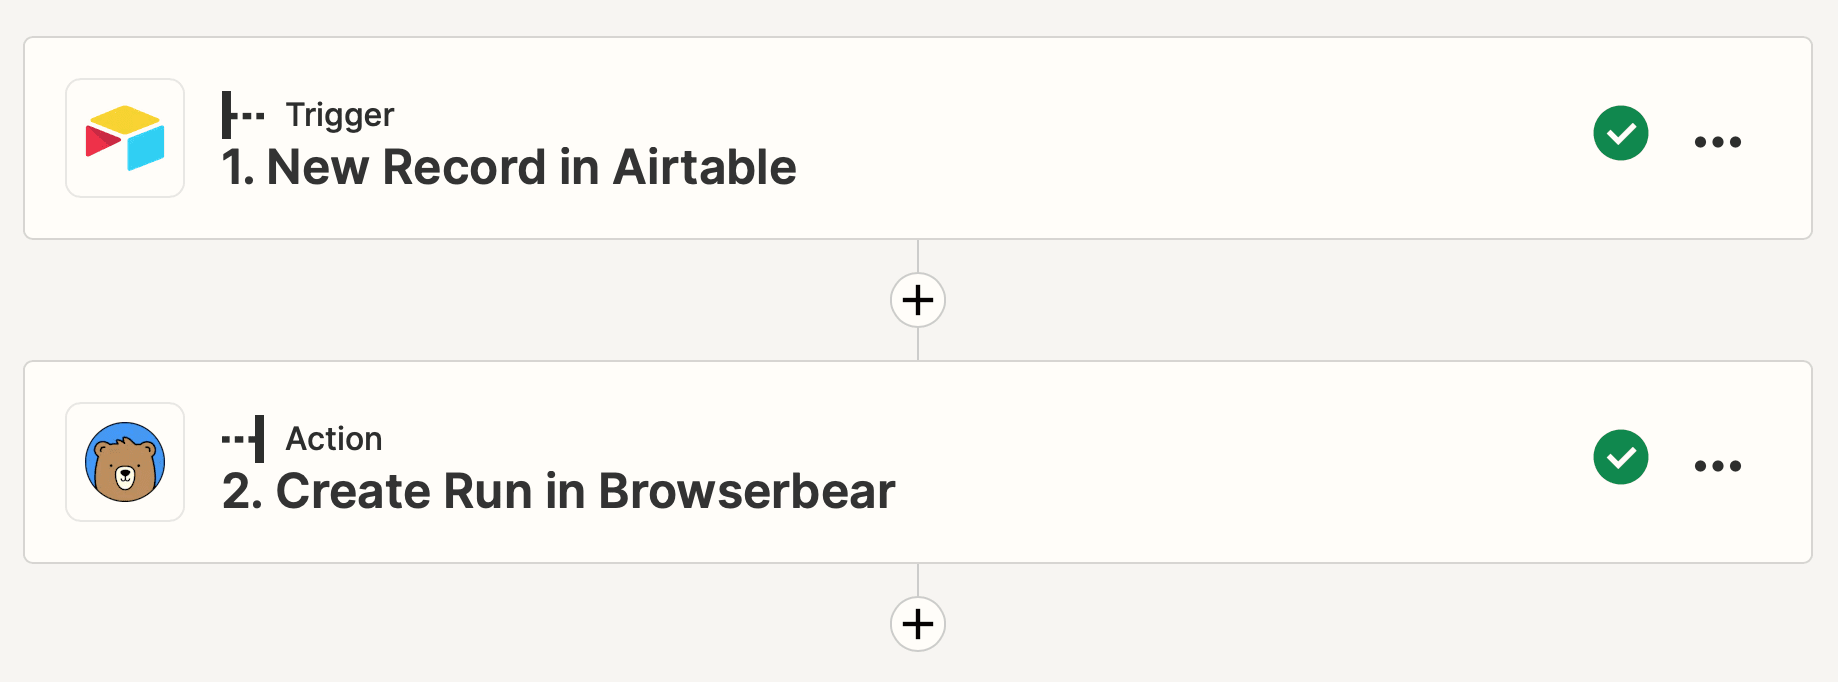 Screenshot of Zapier flow with Airtable new record trigger and Browserbear create run action